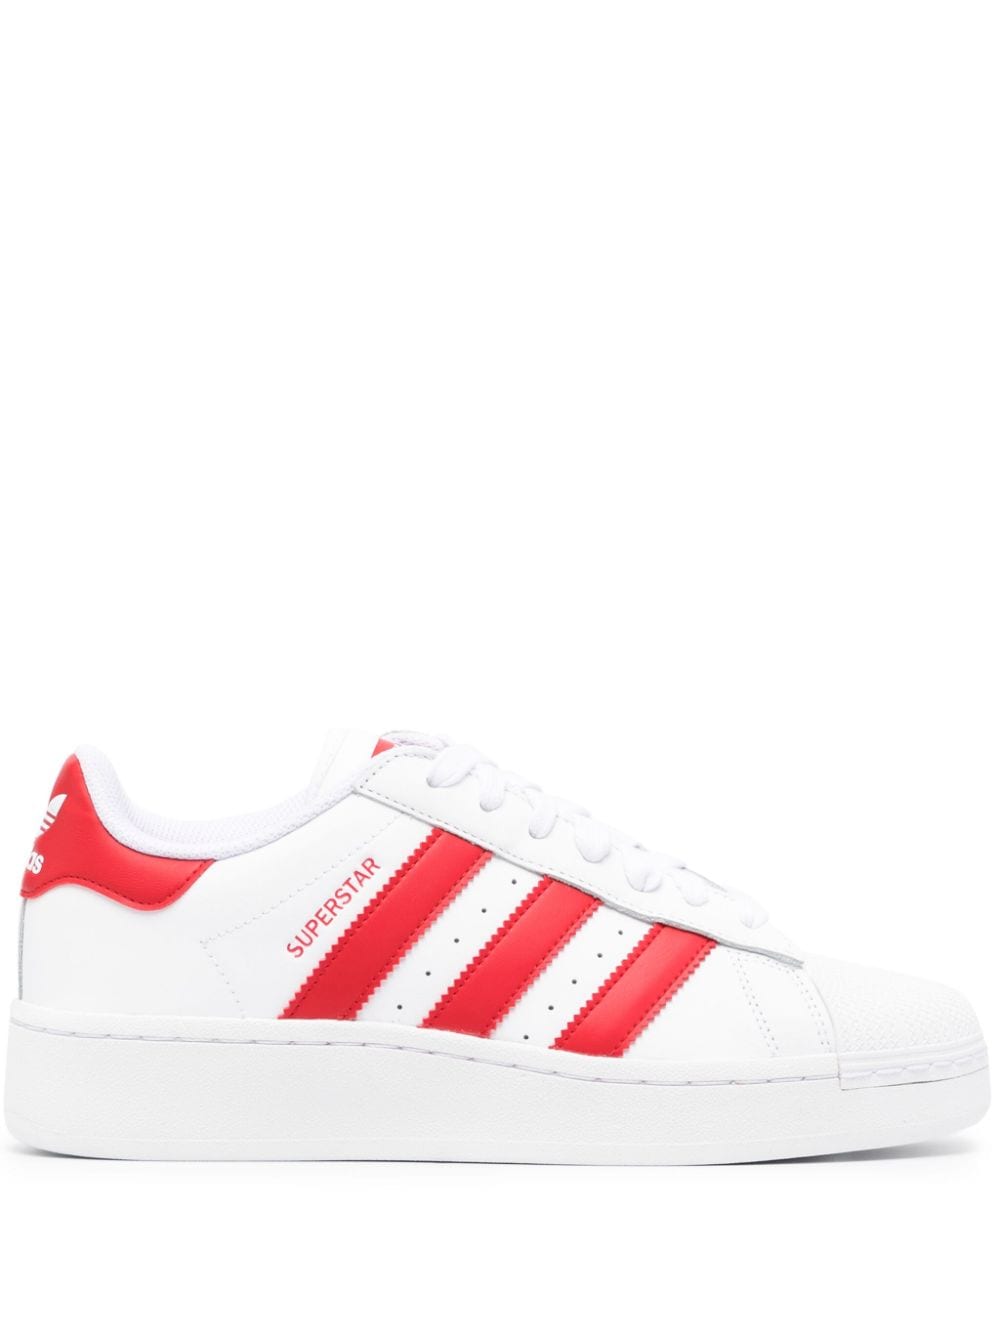 adidas Superstar leather sneakers - Bianco